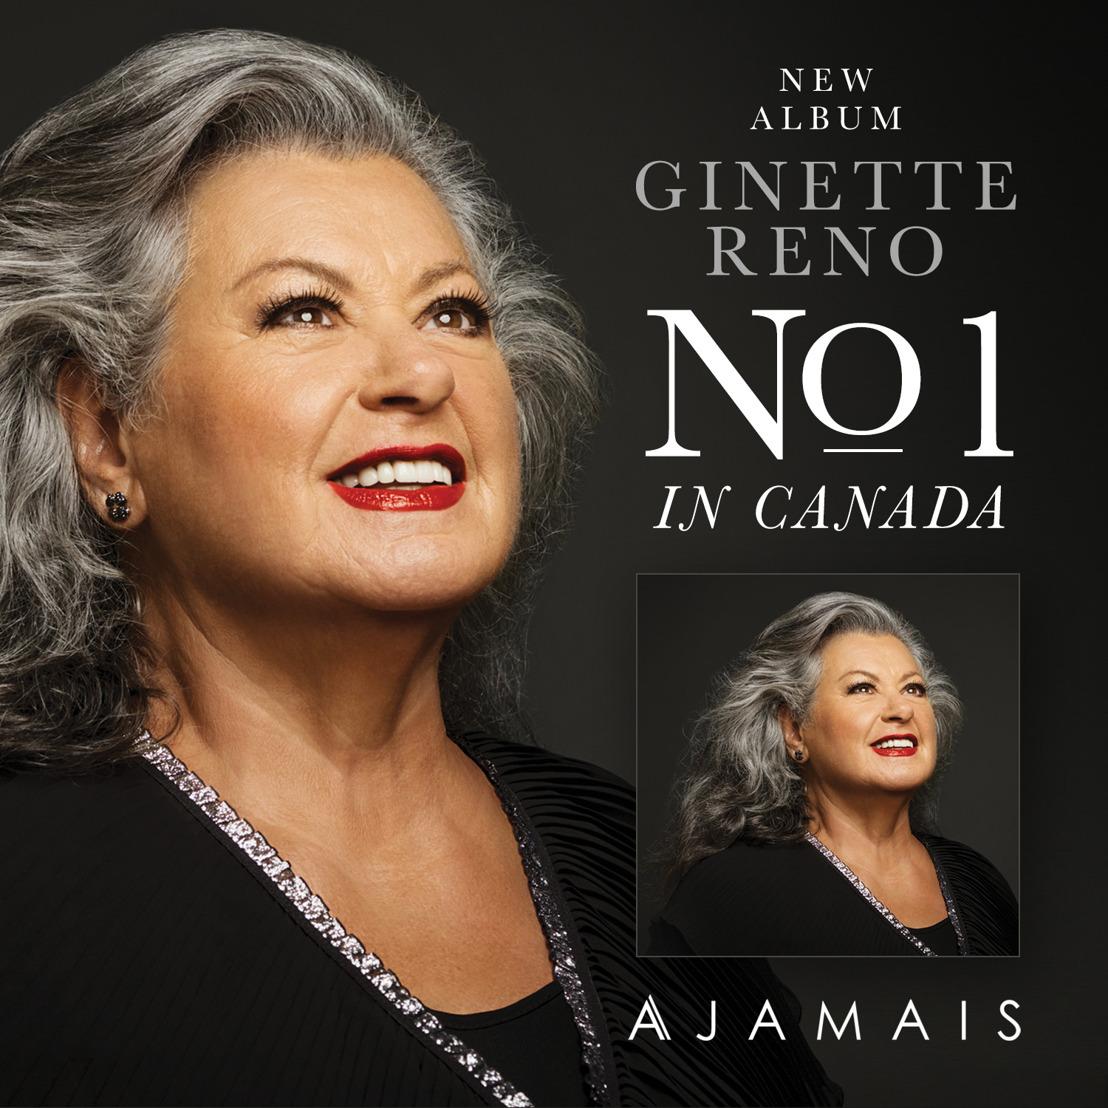 Quebec Superstar Ginette Reno Holds The Number 1 Spot In Canada For Second Week In A Row